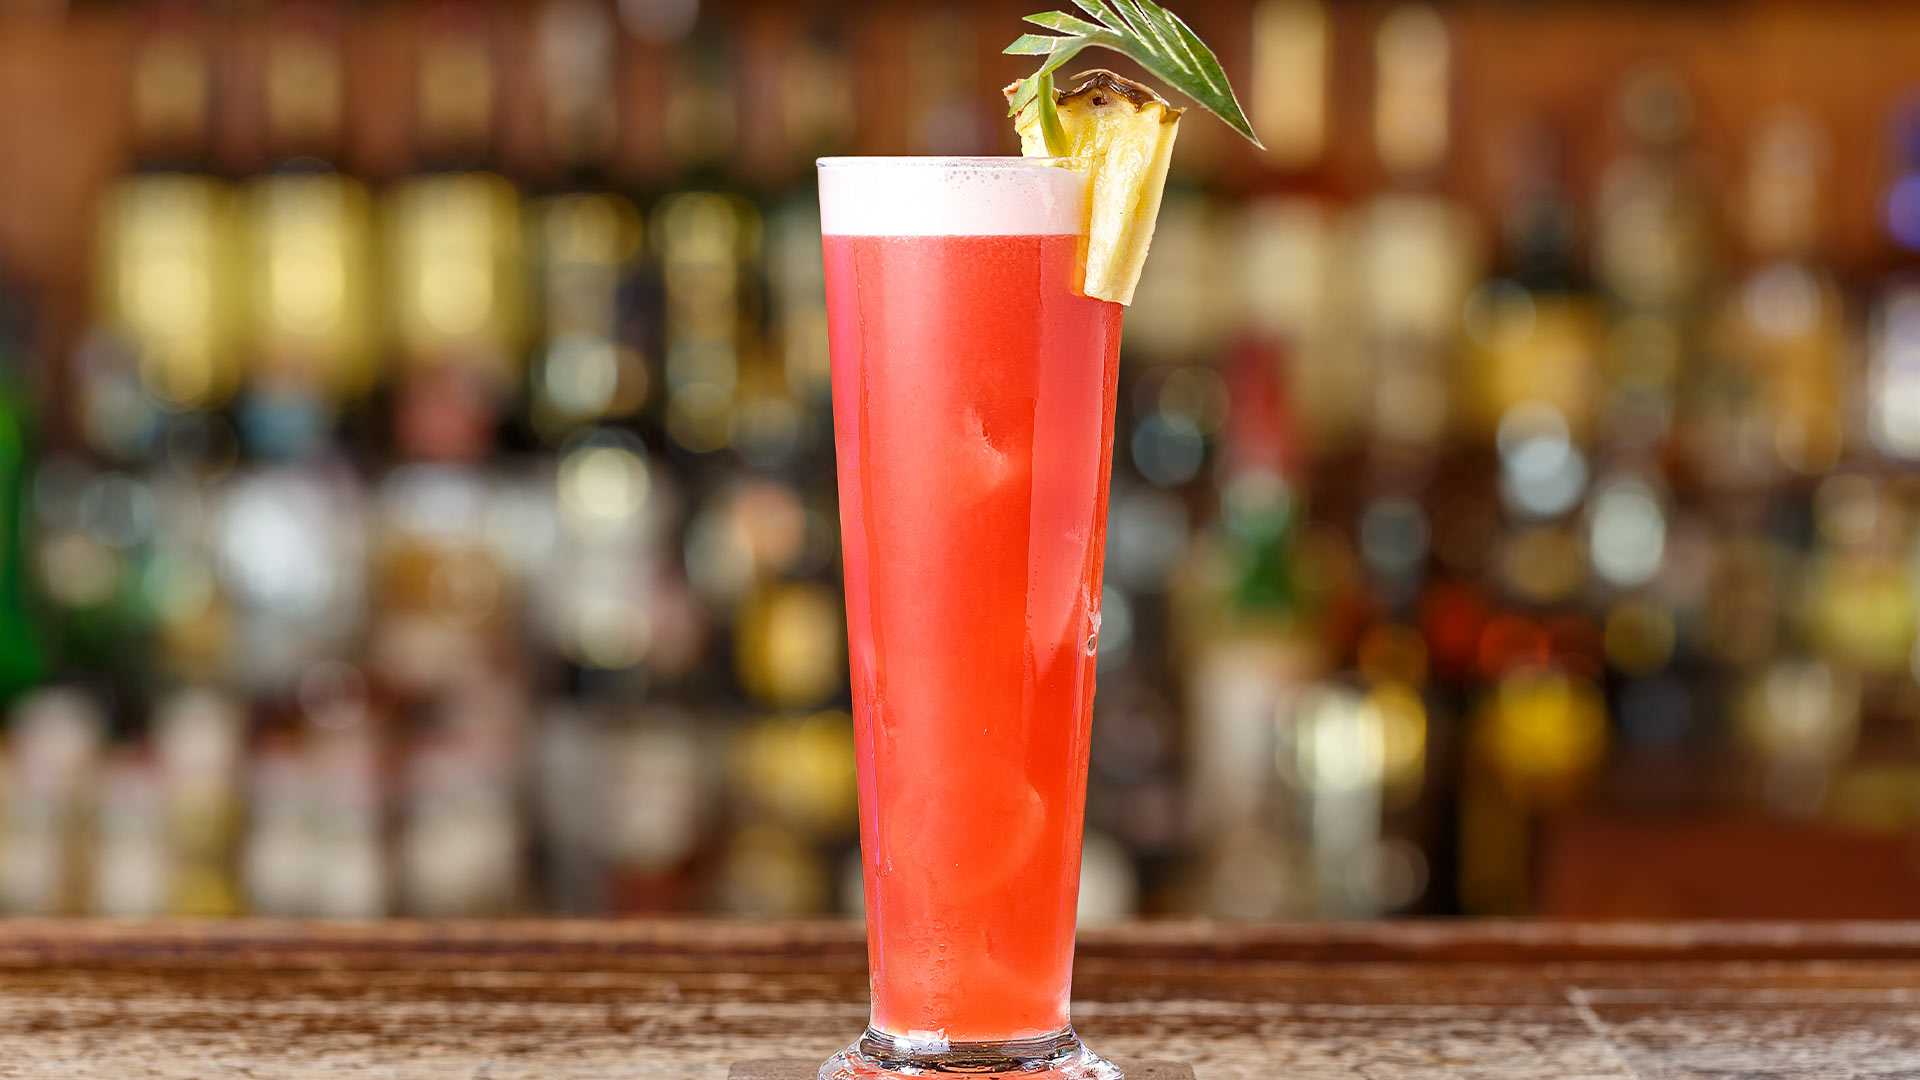 Singapore Sling, a pink cocktail served at the best bar in Singapore